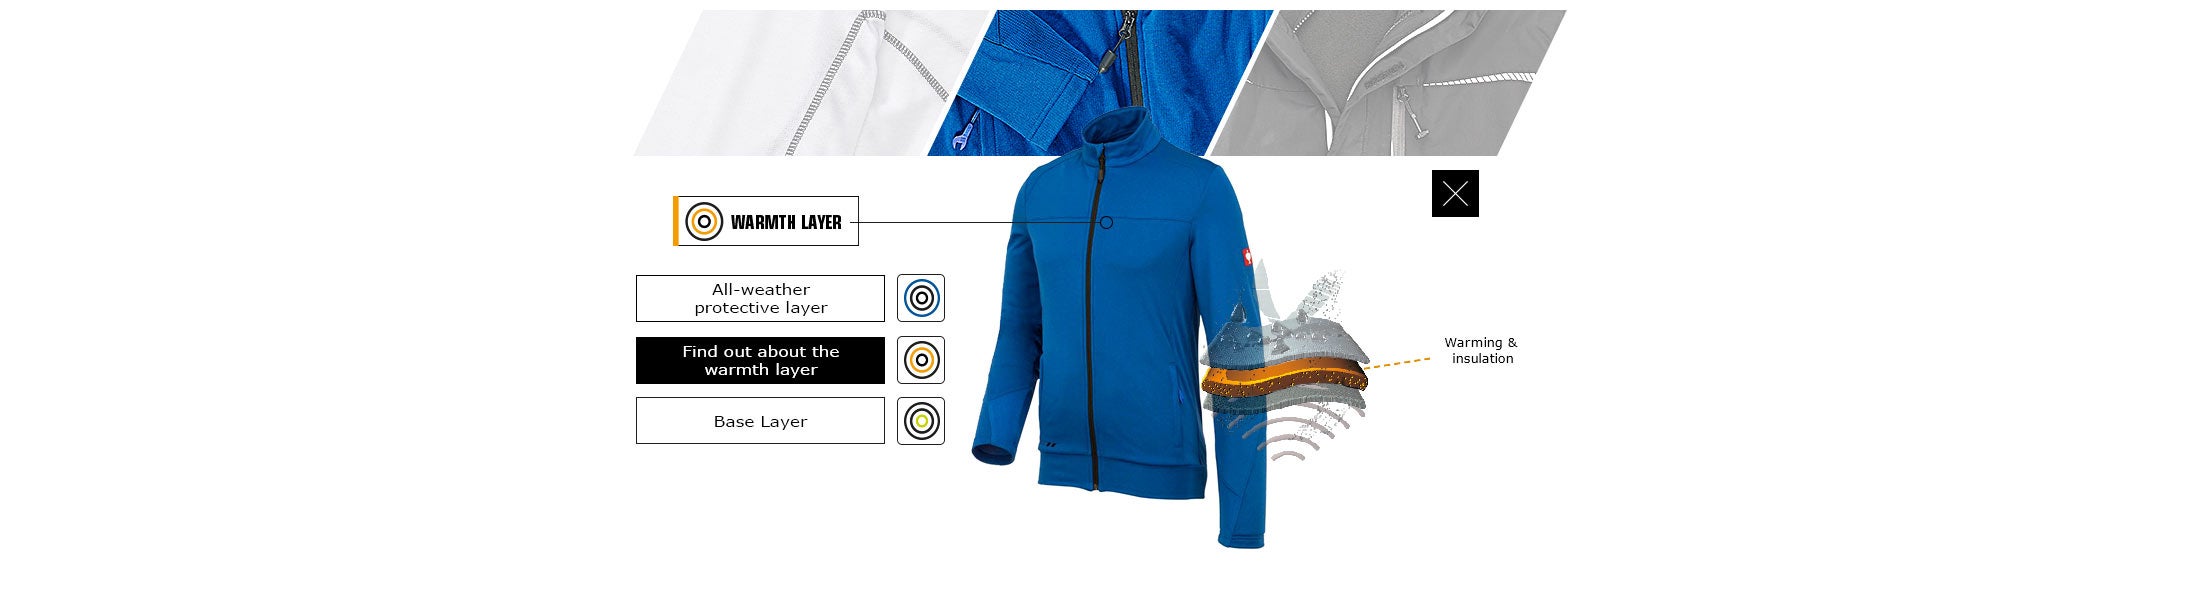 engelbert strauss warmth layer workwear prevents the body becoming cold